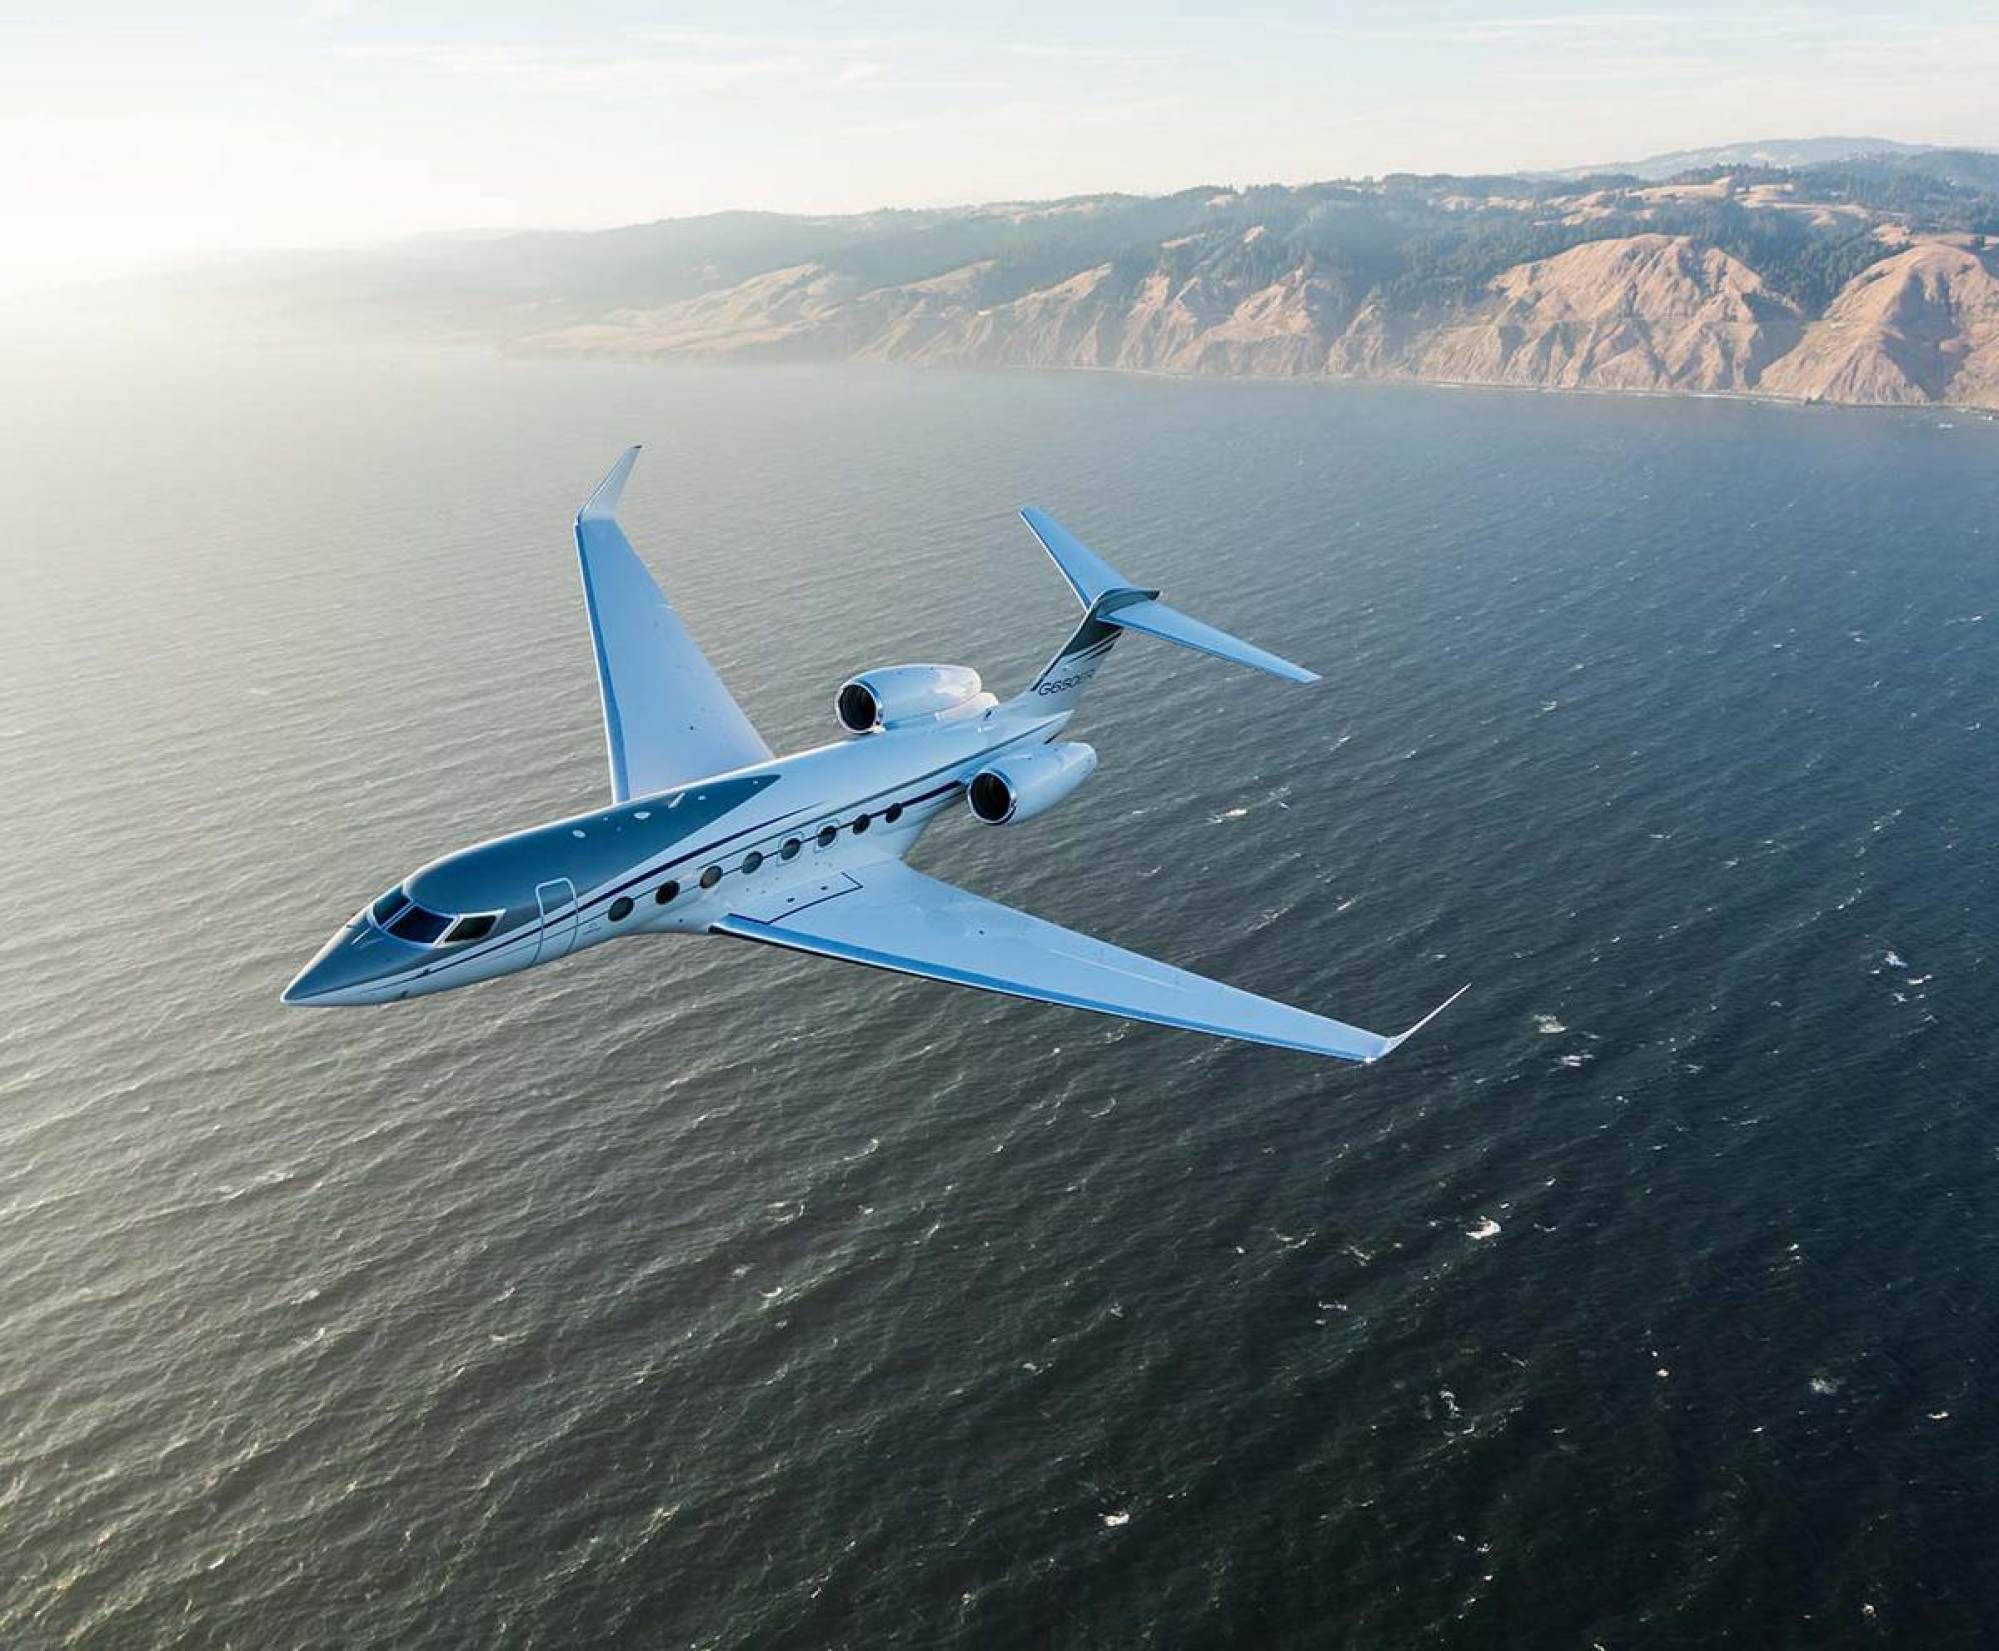 A photo of the G650ER in the air. Photo: luxurylaunches.com